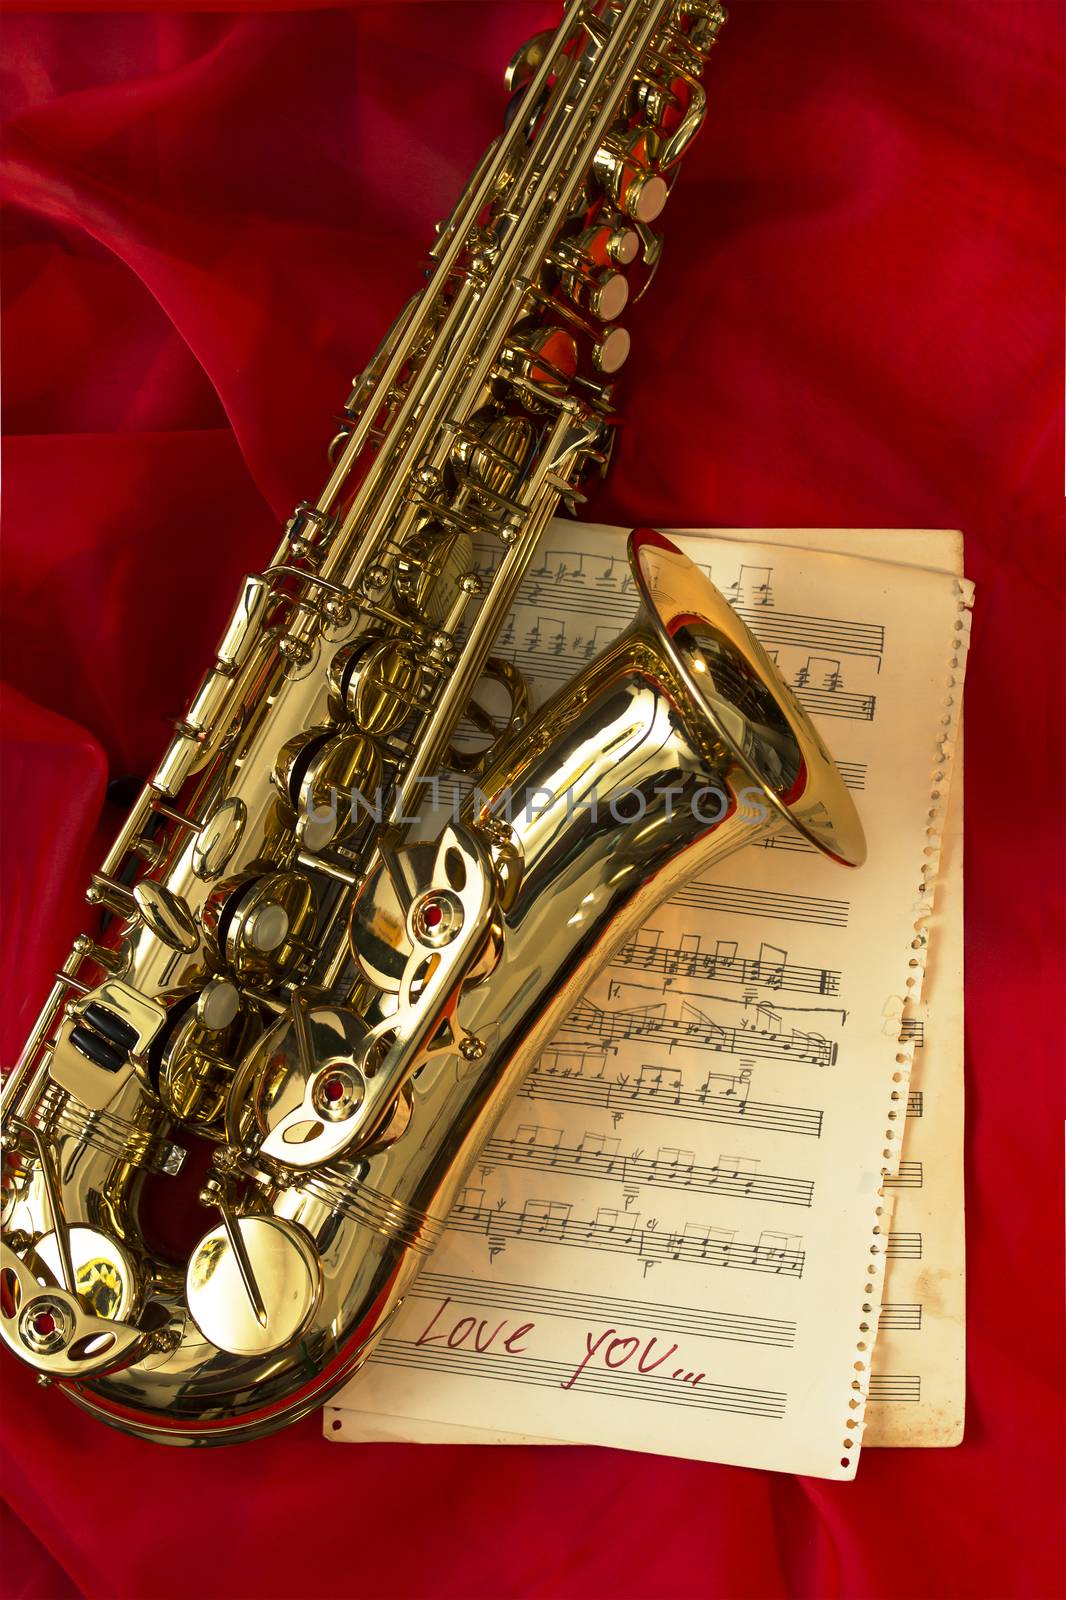 Golden saxophone and music sheets on a red background